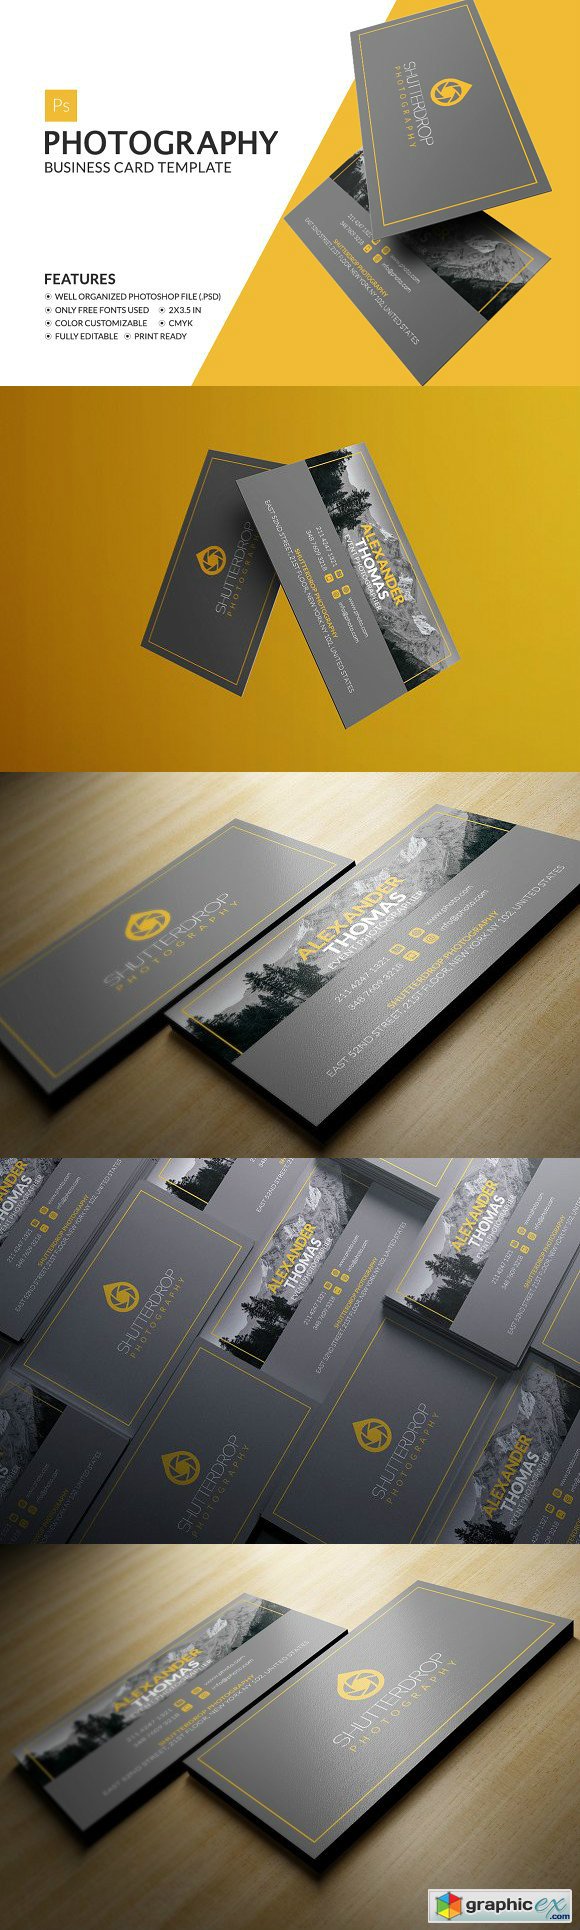 Photography Business Card 1161905